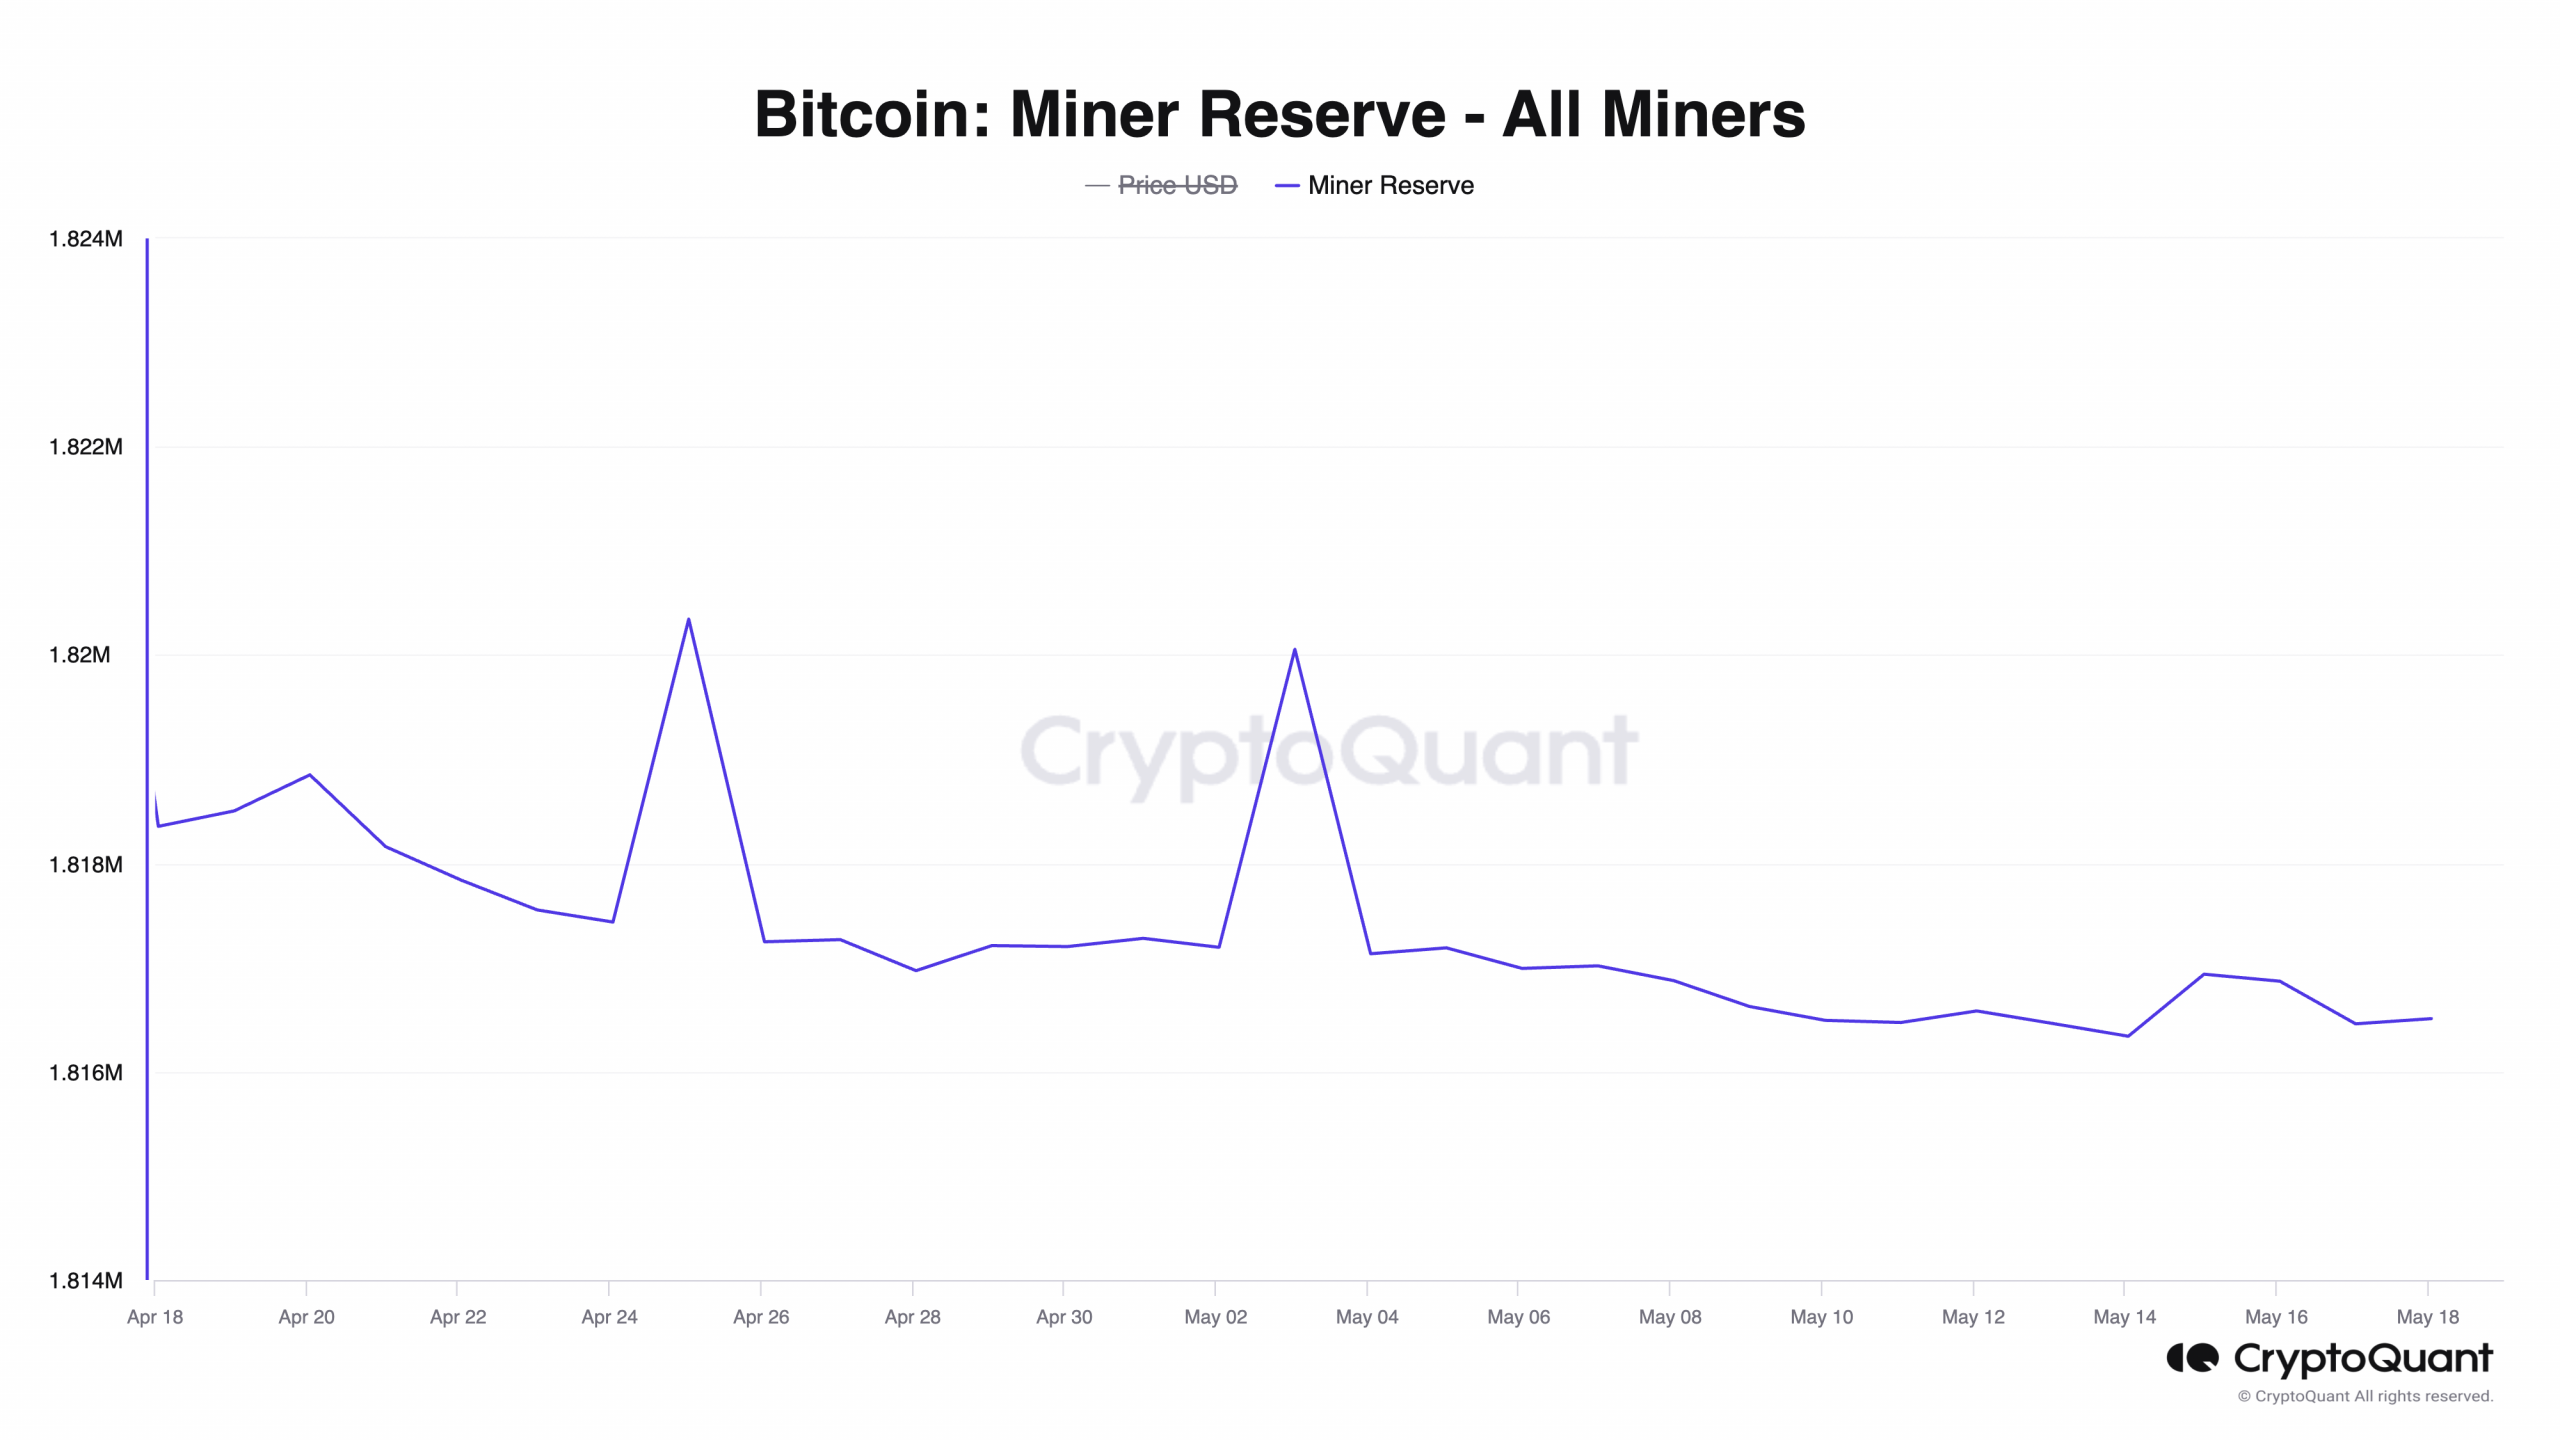 Bitcoin Miner Reserve - All Miners